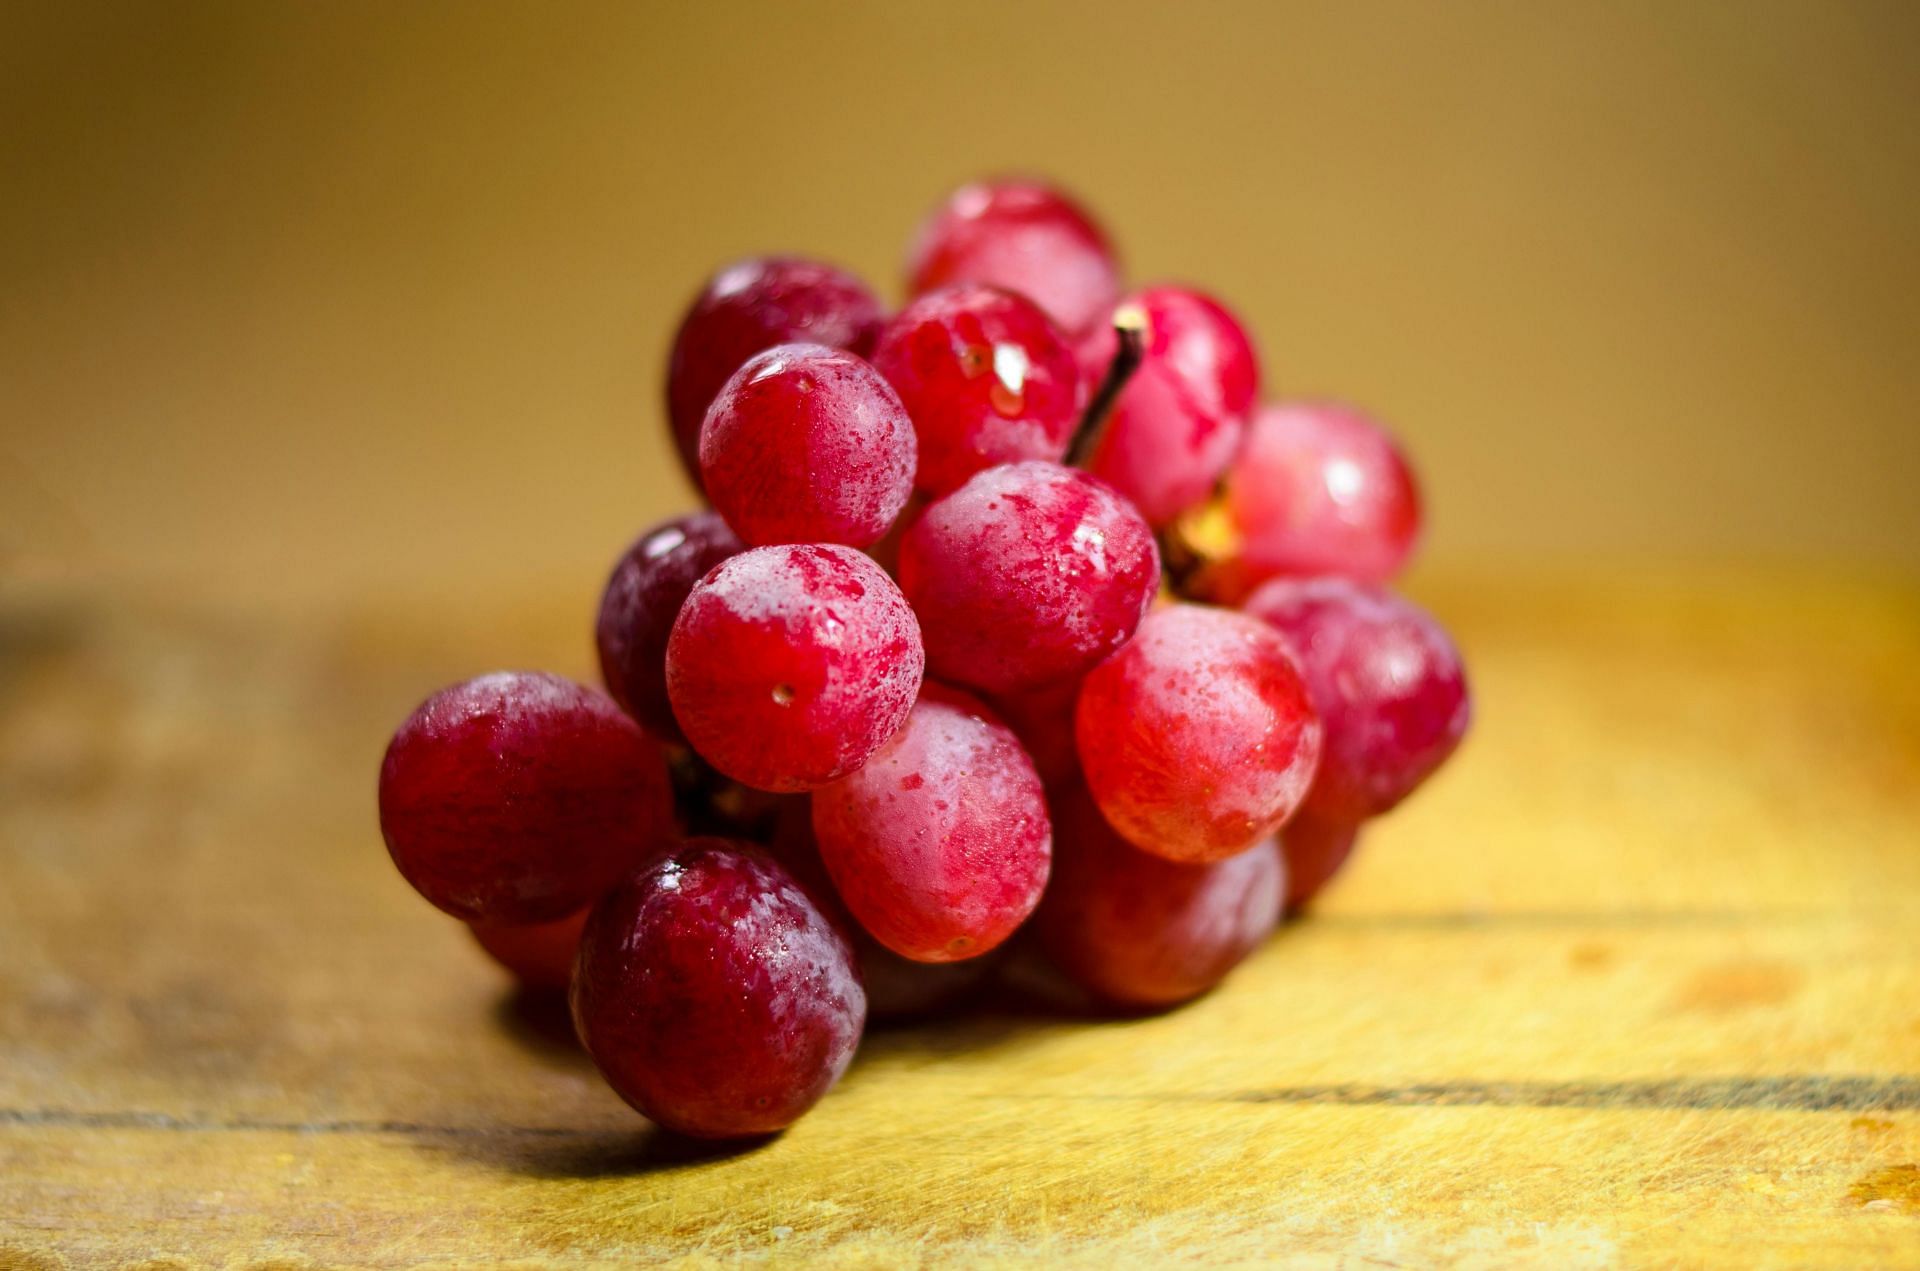 Red grapes benefits (image sourced via Pexels / Photo by Bruno)